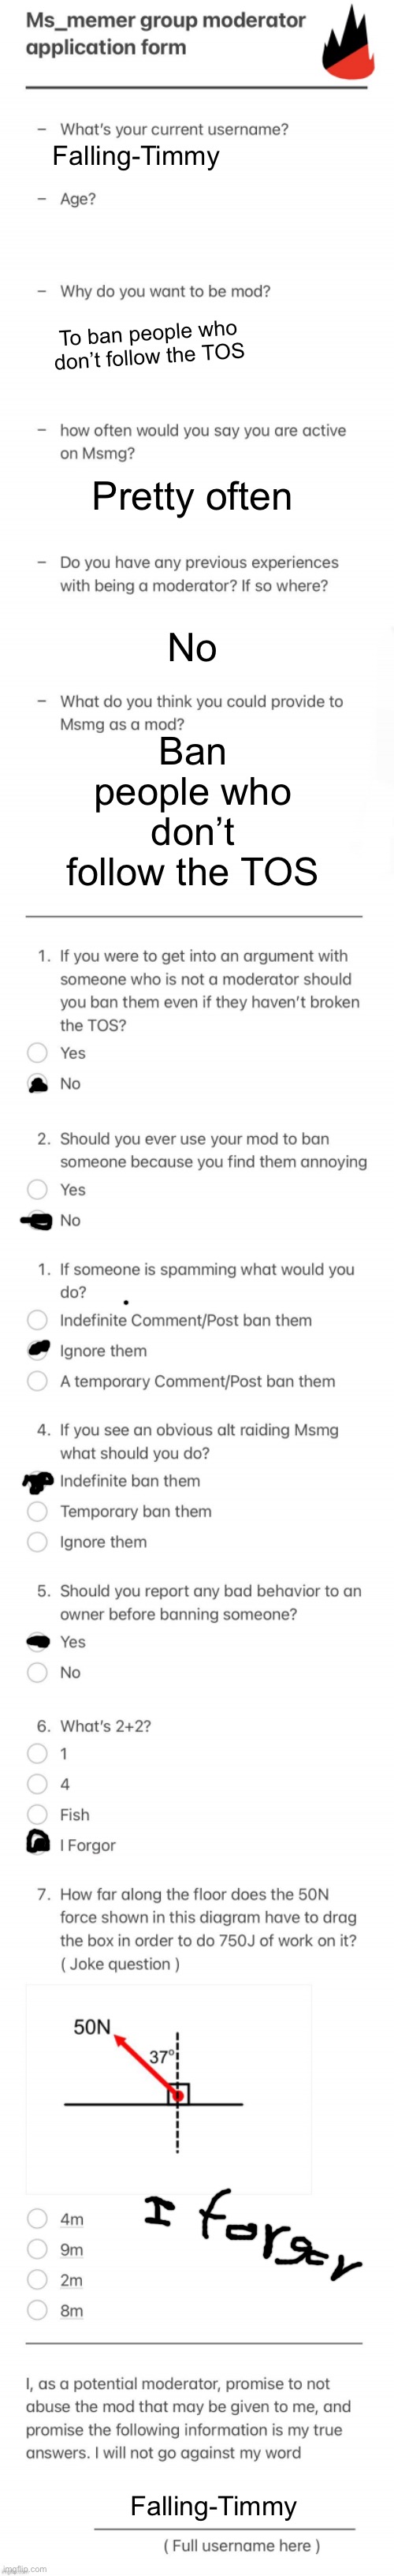 UPDATED MSMG MOD FORM | Falling-Timmy; To ban people who don’t follow the TOS; Pretty often; No; Ban people who don’t follow the TOS; Falling-Timmy | image tagged in updated msmg mod form | made w/ Imgflip meme maker